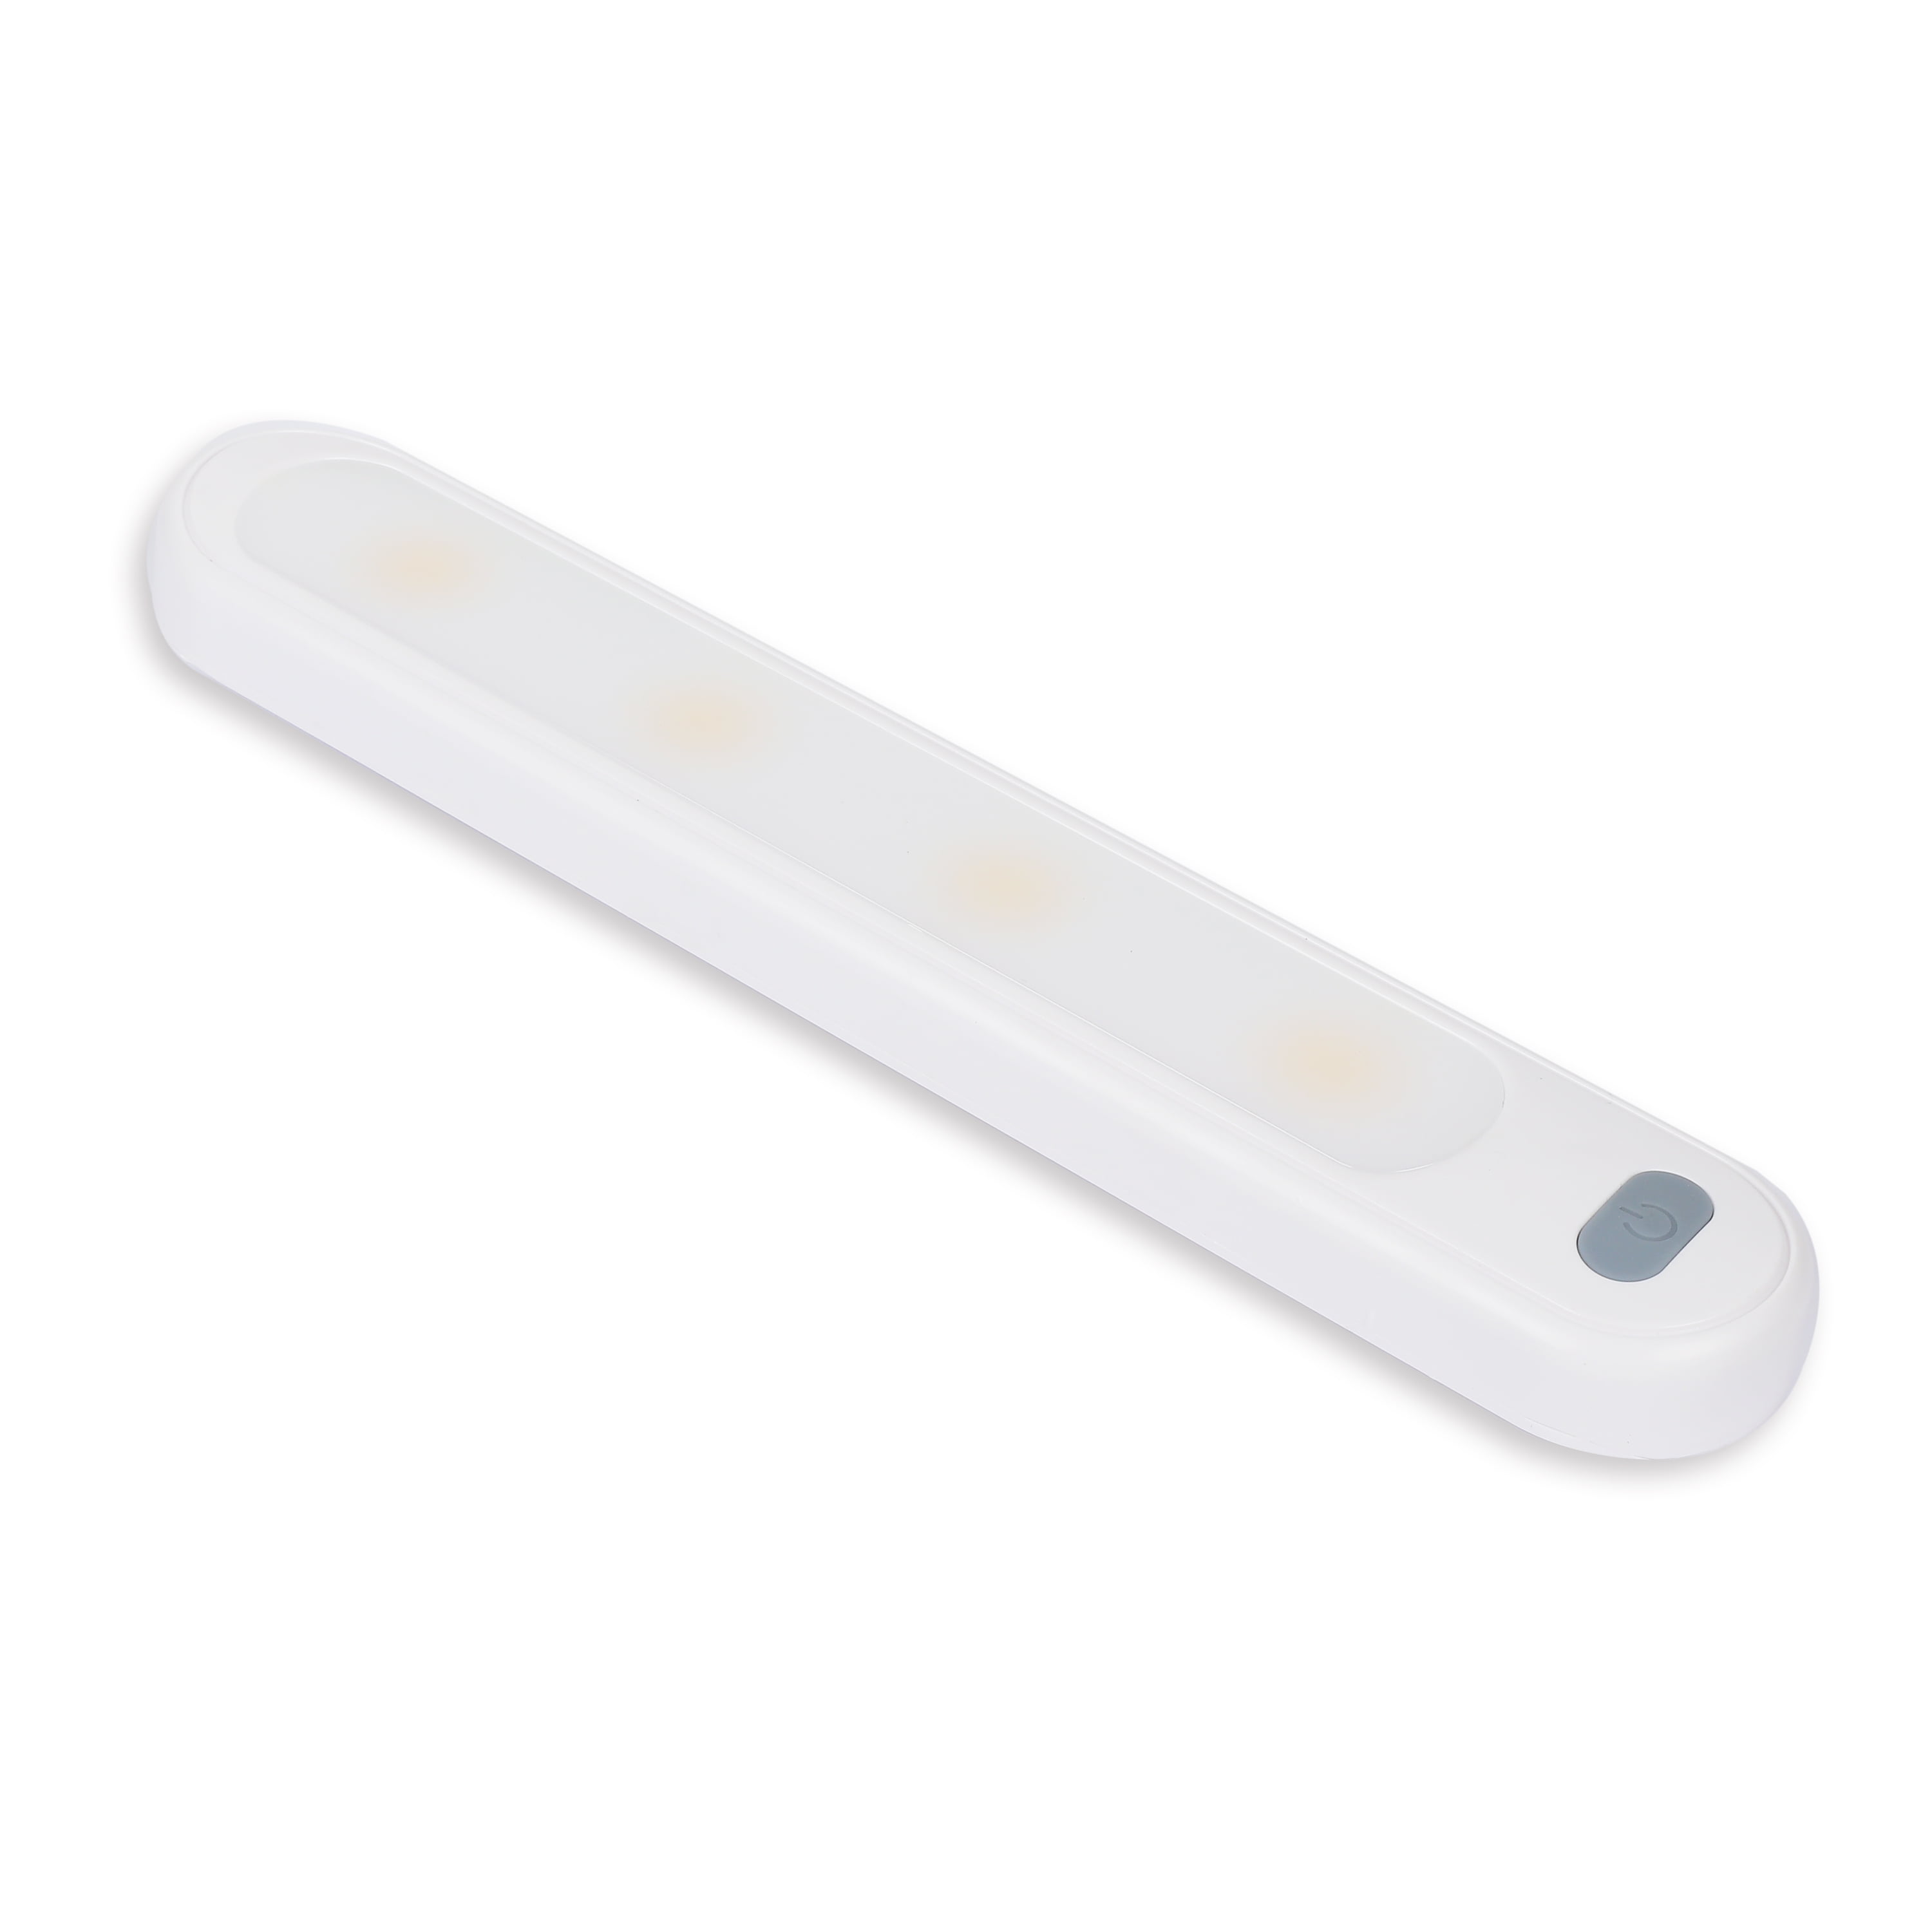 Great Value Battery Operated LED Light Bar Model 4140 - 12 in